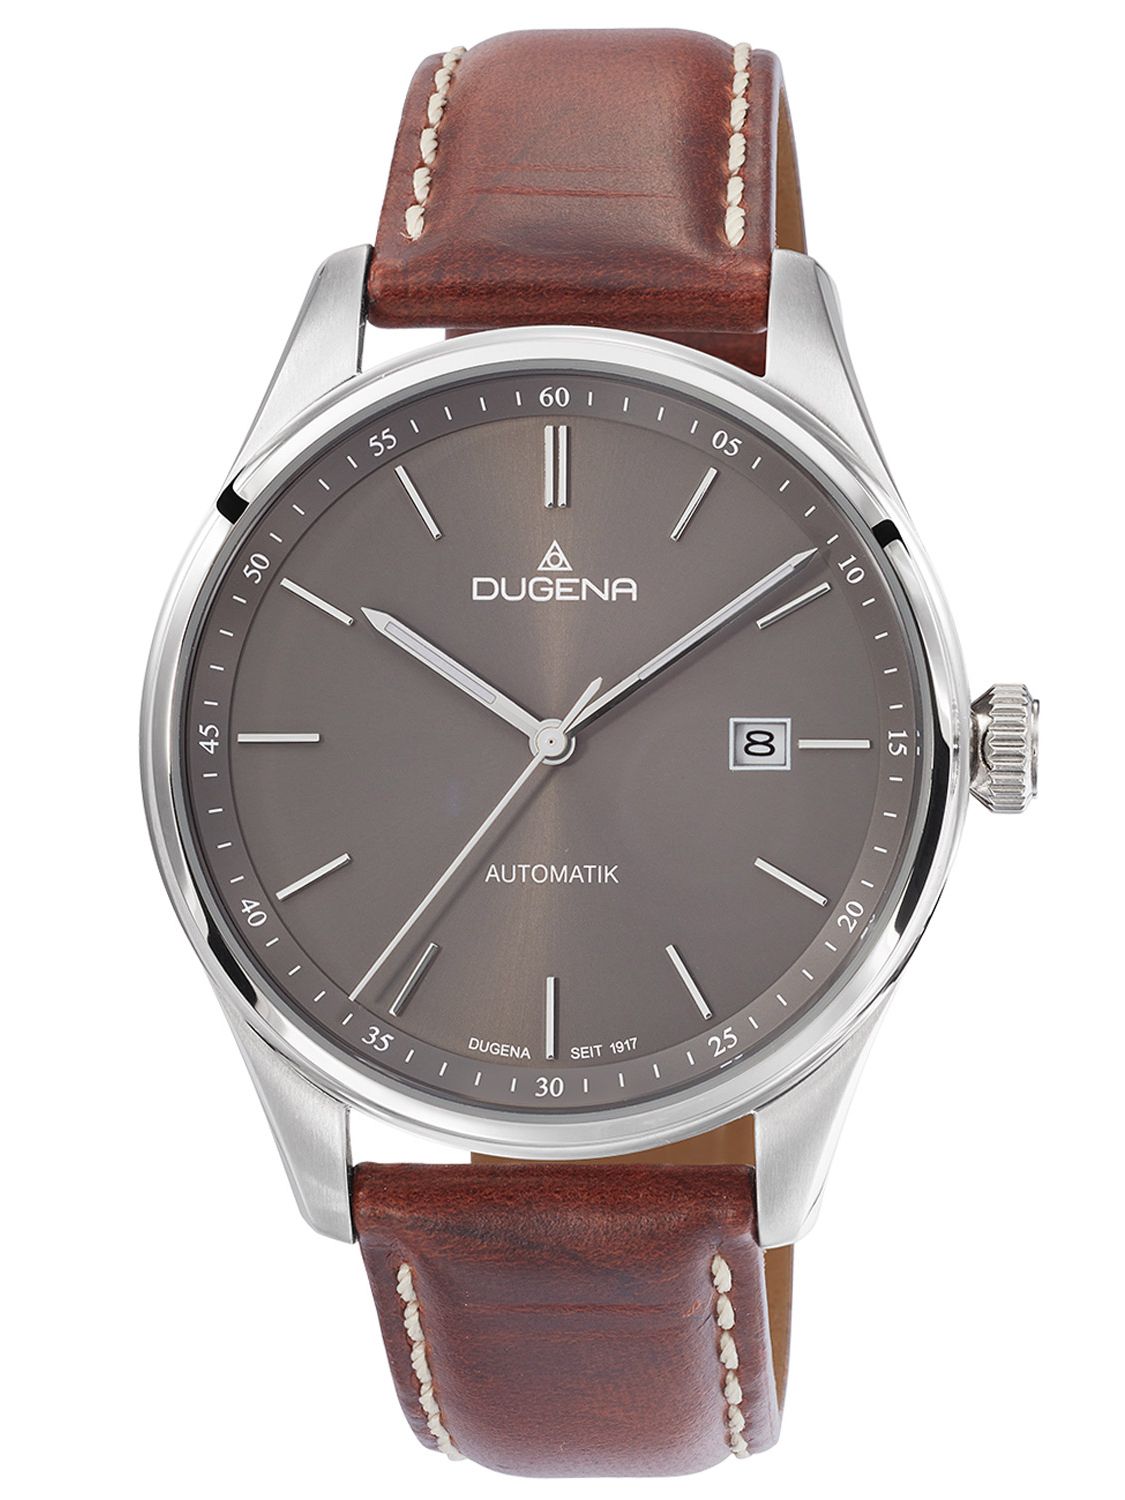 Dugena Men's Watch Automatic Milano with Leather Strap 4461012